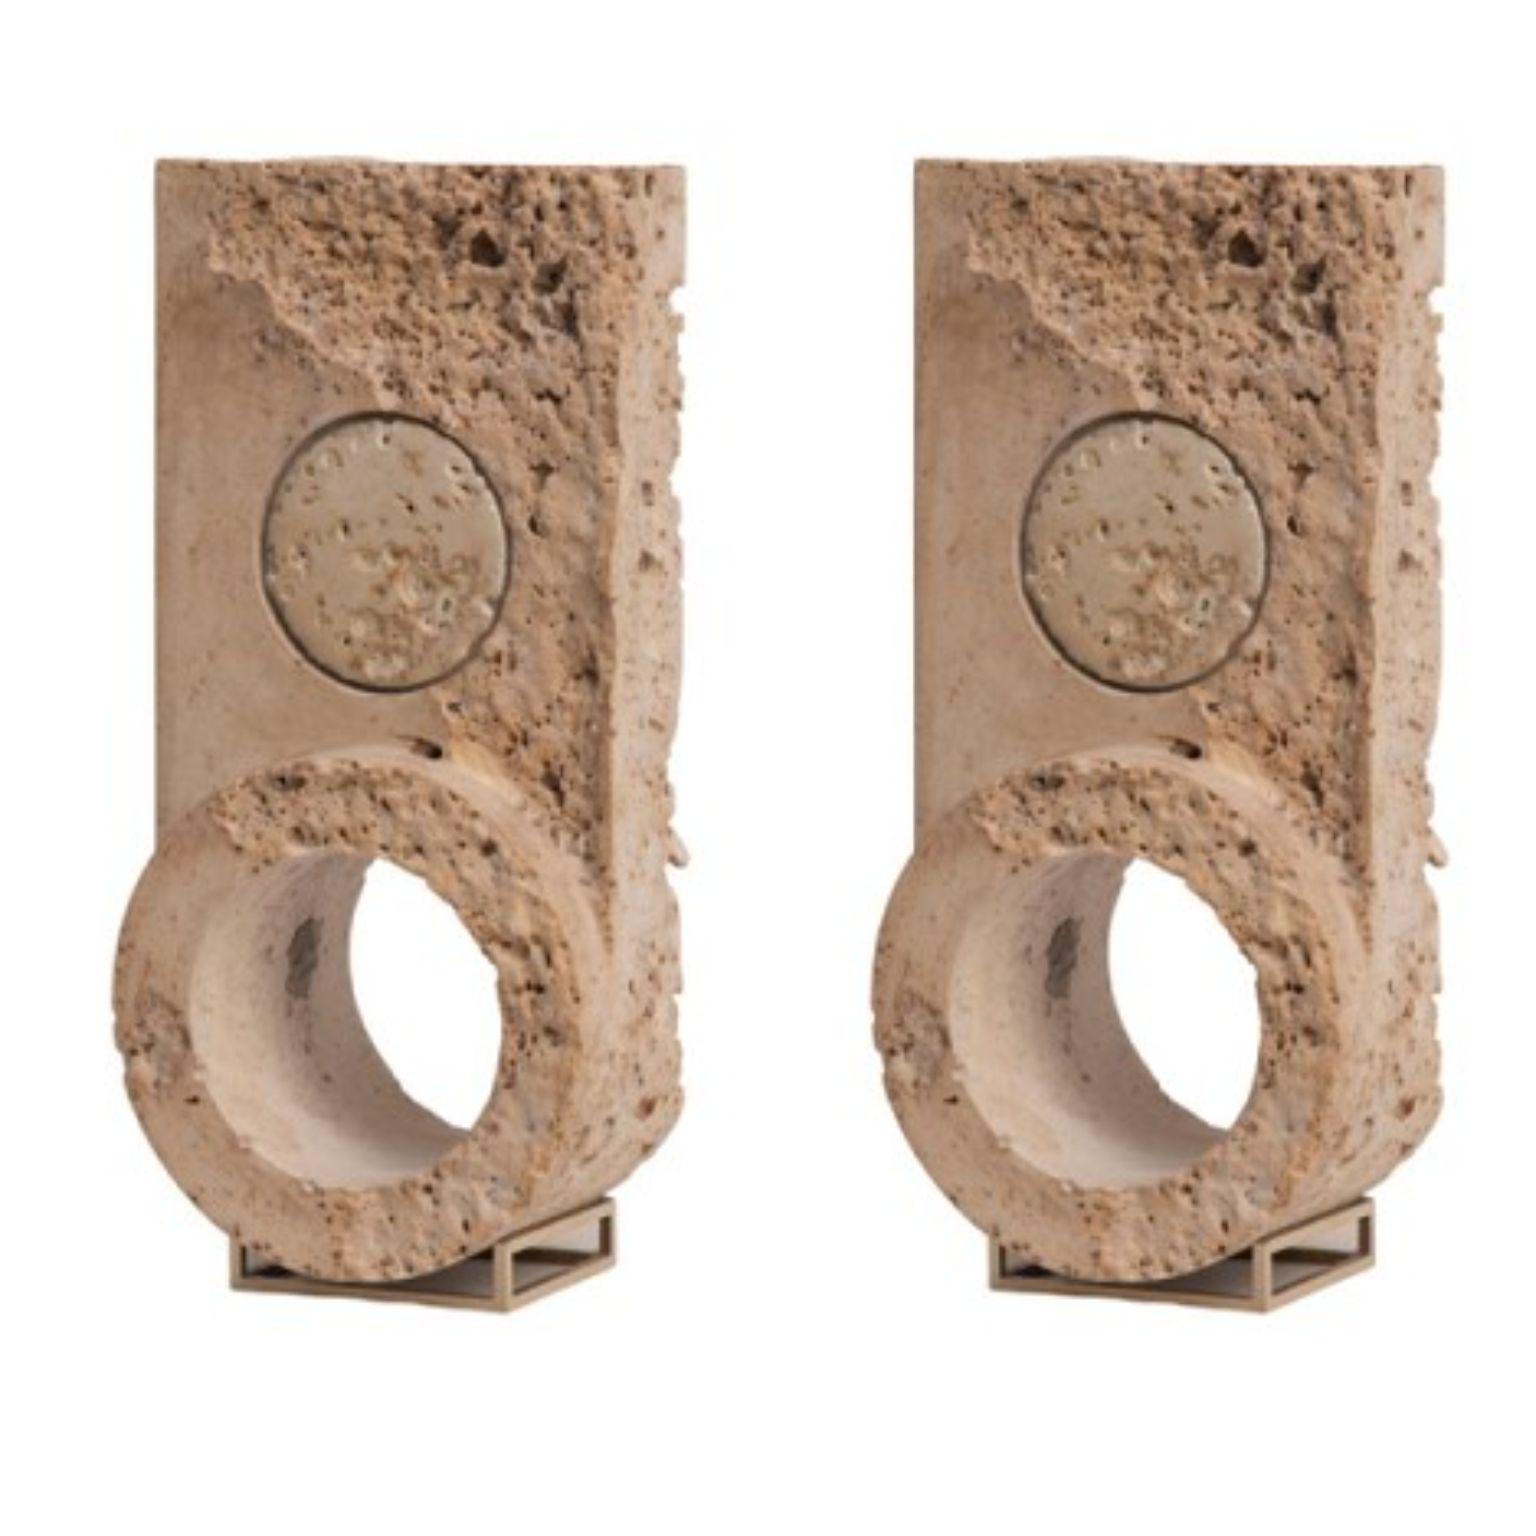 Set of 2 disc clocks by Turbina
Dimensions: D24 x W11 x H7.5 cm each
Materials: Cast Stone, Nickel, Plated Brass

No hours, no minutes, no seconds. 
The Clock series inform us on the trace of time. Through a slow rotation, Disc Clock place us in an